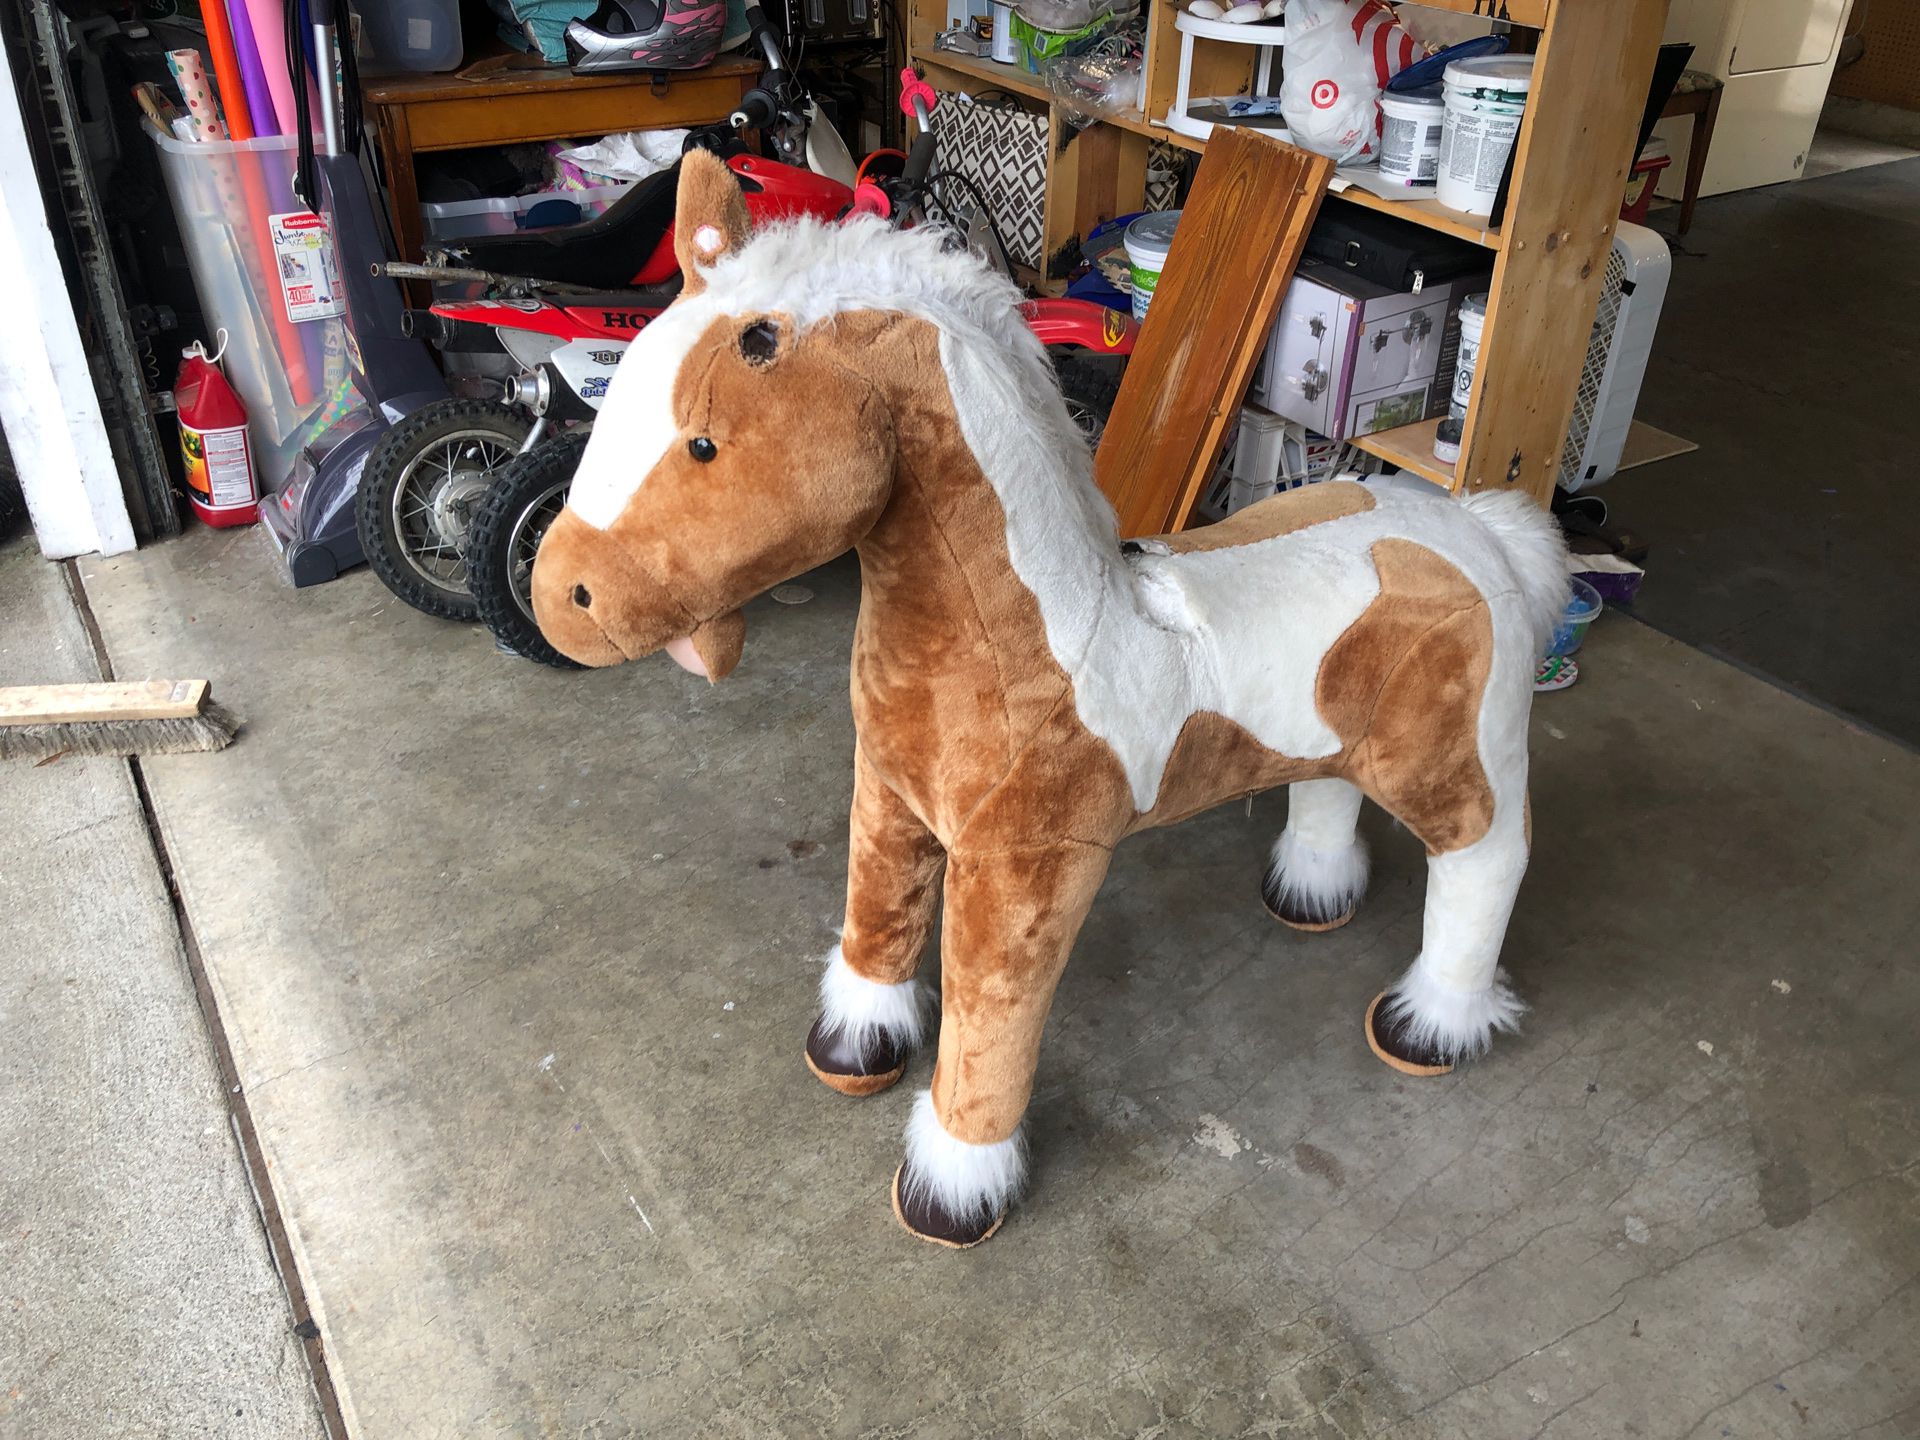 Free play horse well used but very sturdy